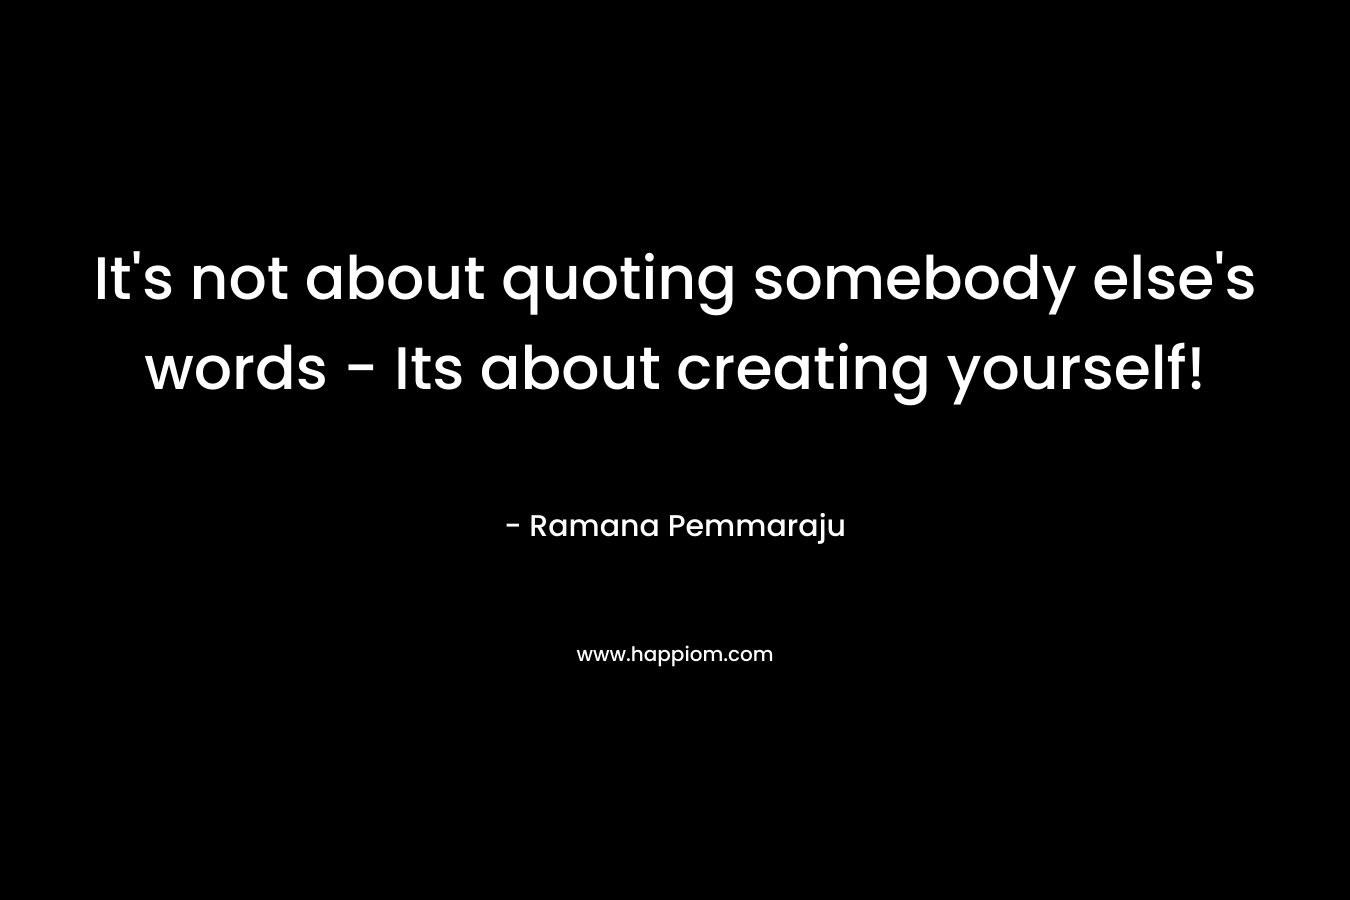 It's not about quoting somebody else's words - Its about creating yourself!